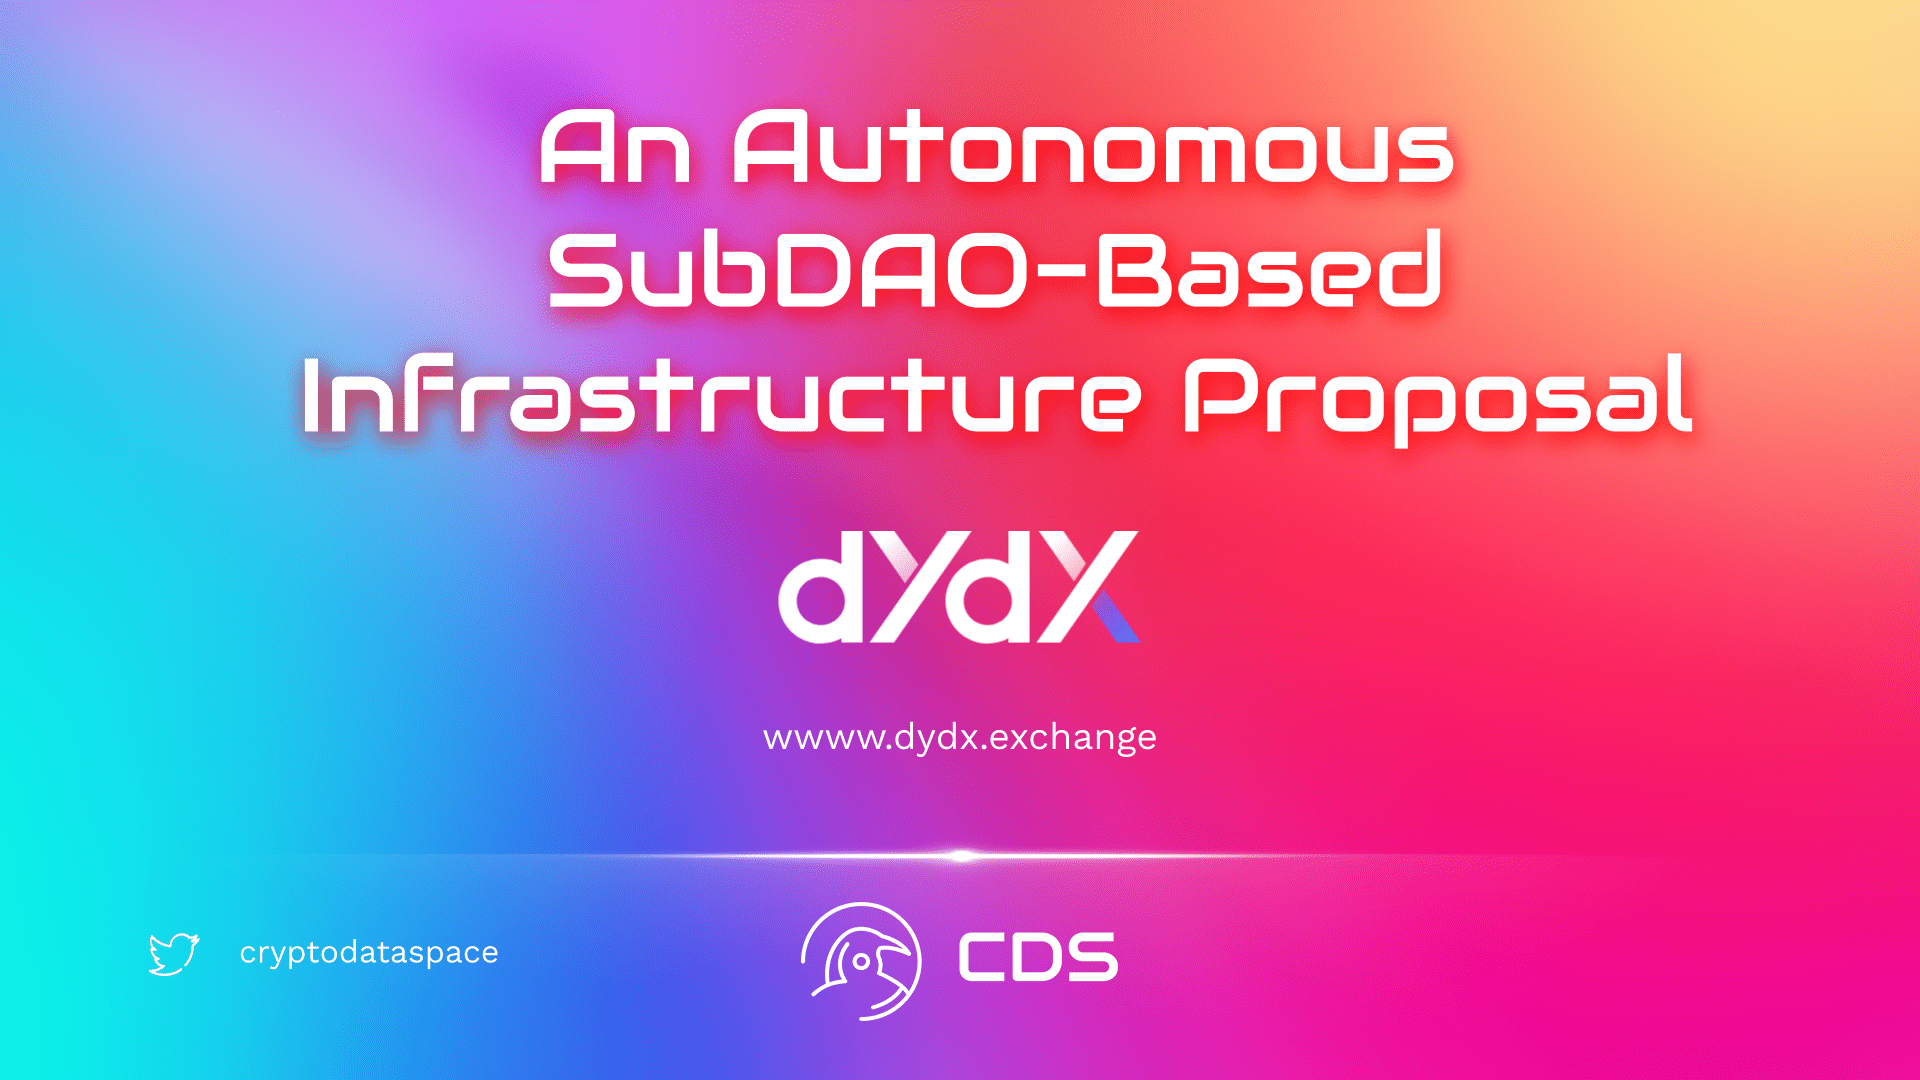 The dYdX Foundation Introduces a Proposal for an Autonomous subDAO-Based Infrastructure